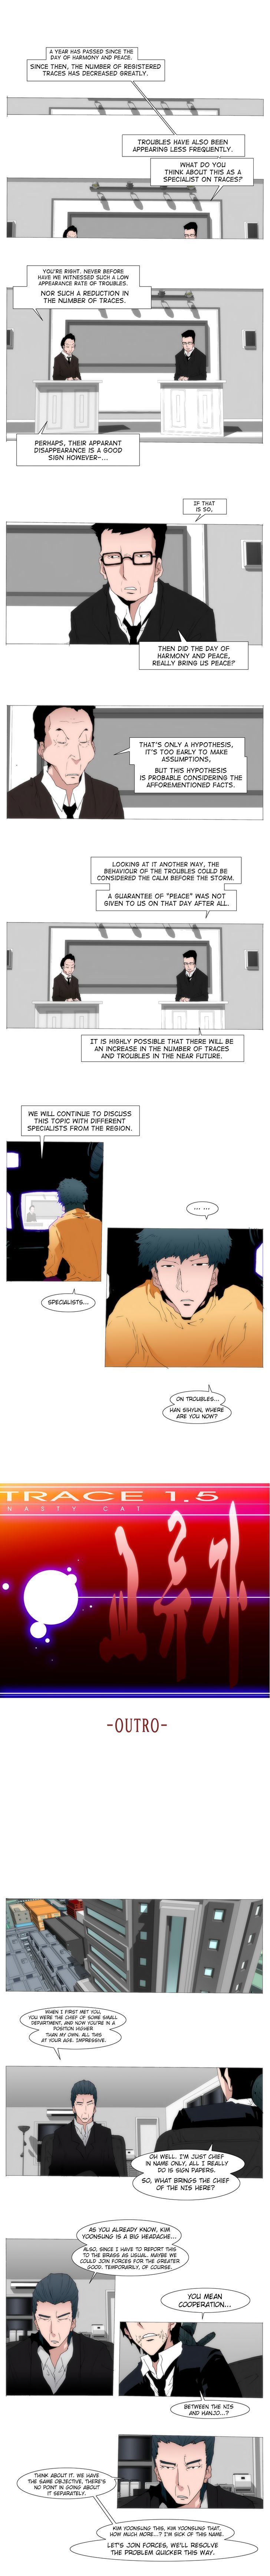 Trace 1.5 - Page 3